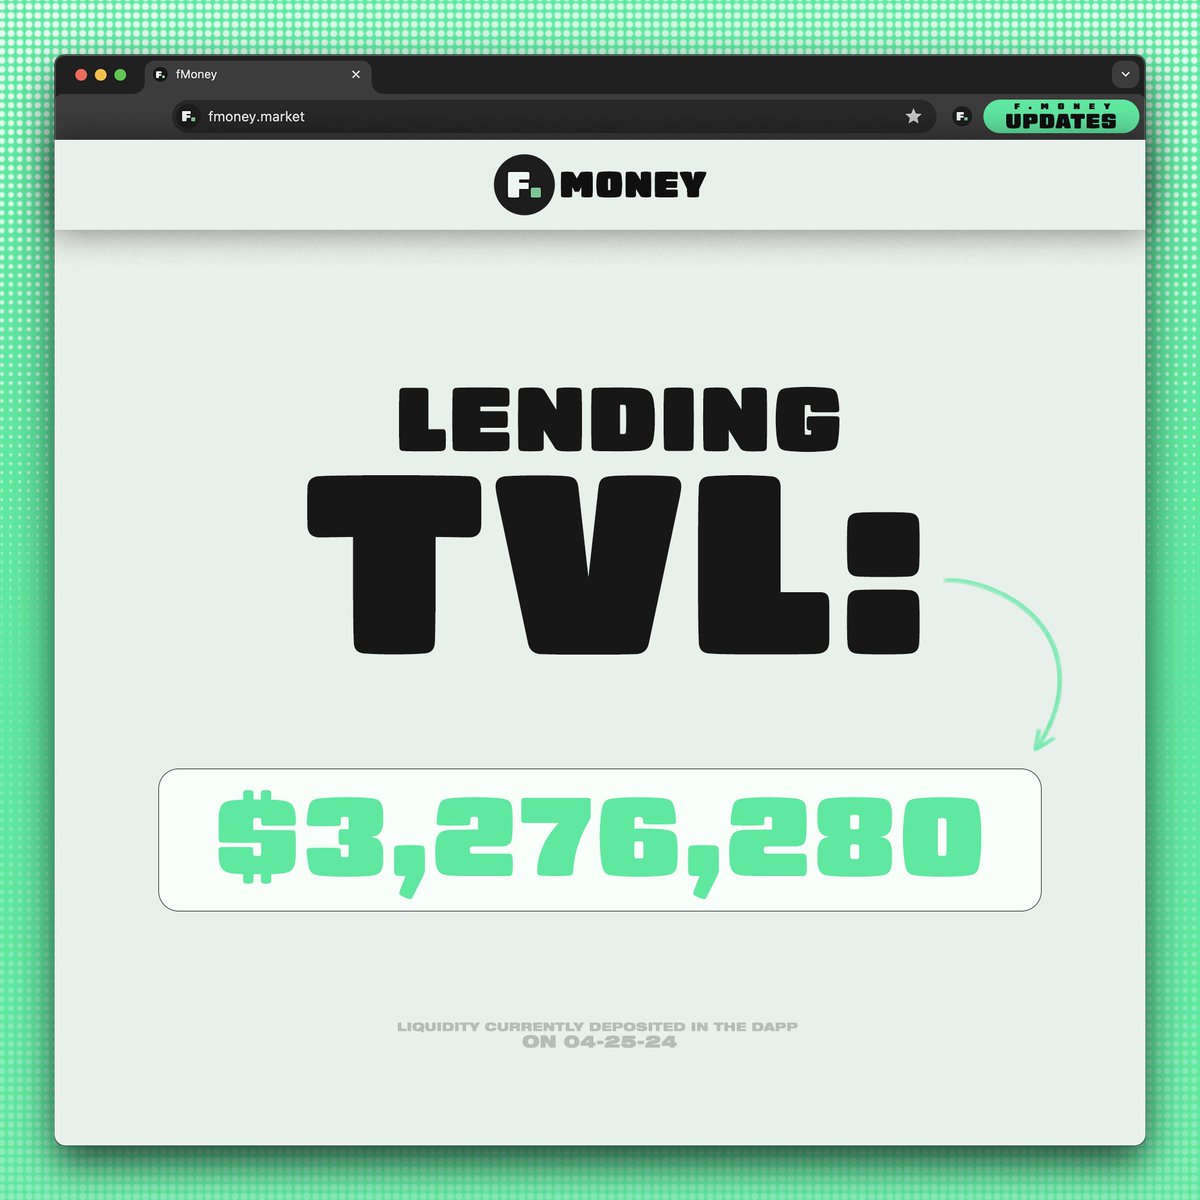 🏦 The TVL on our Money Market is growing consistently! 💰 We reached Almost $3.3M in Lending TVL🔥 💵 And over $8.5M in Supplied TVL! 👨‍🌾 Lend and Borrow on fMoney.Market/lending $FTM $fBUX